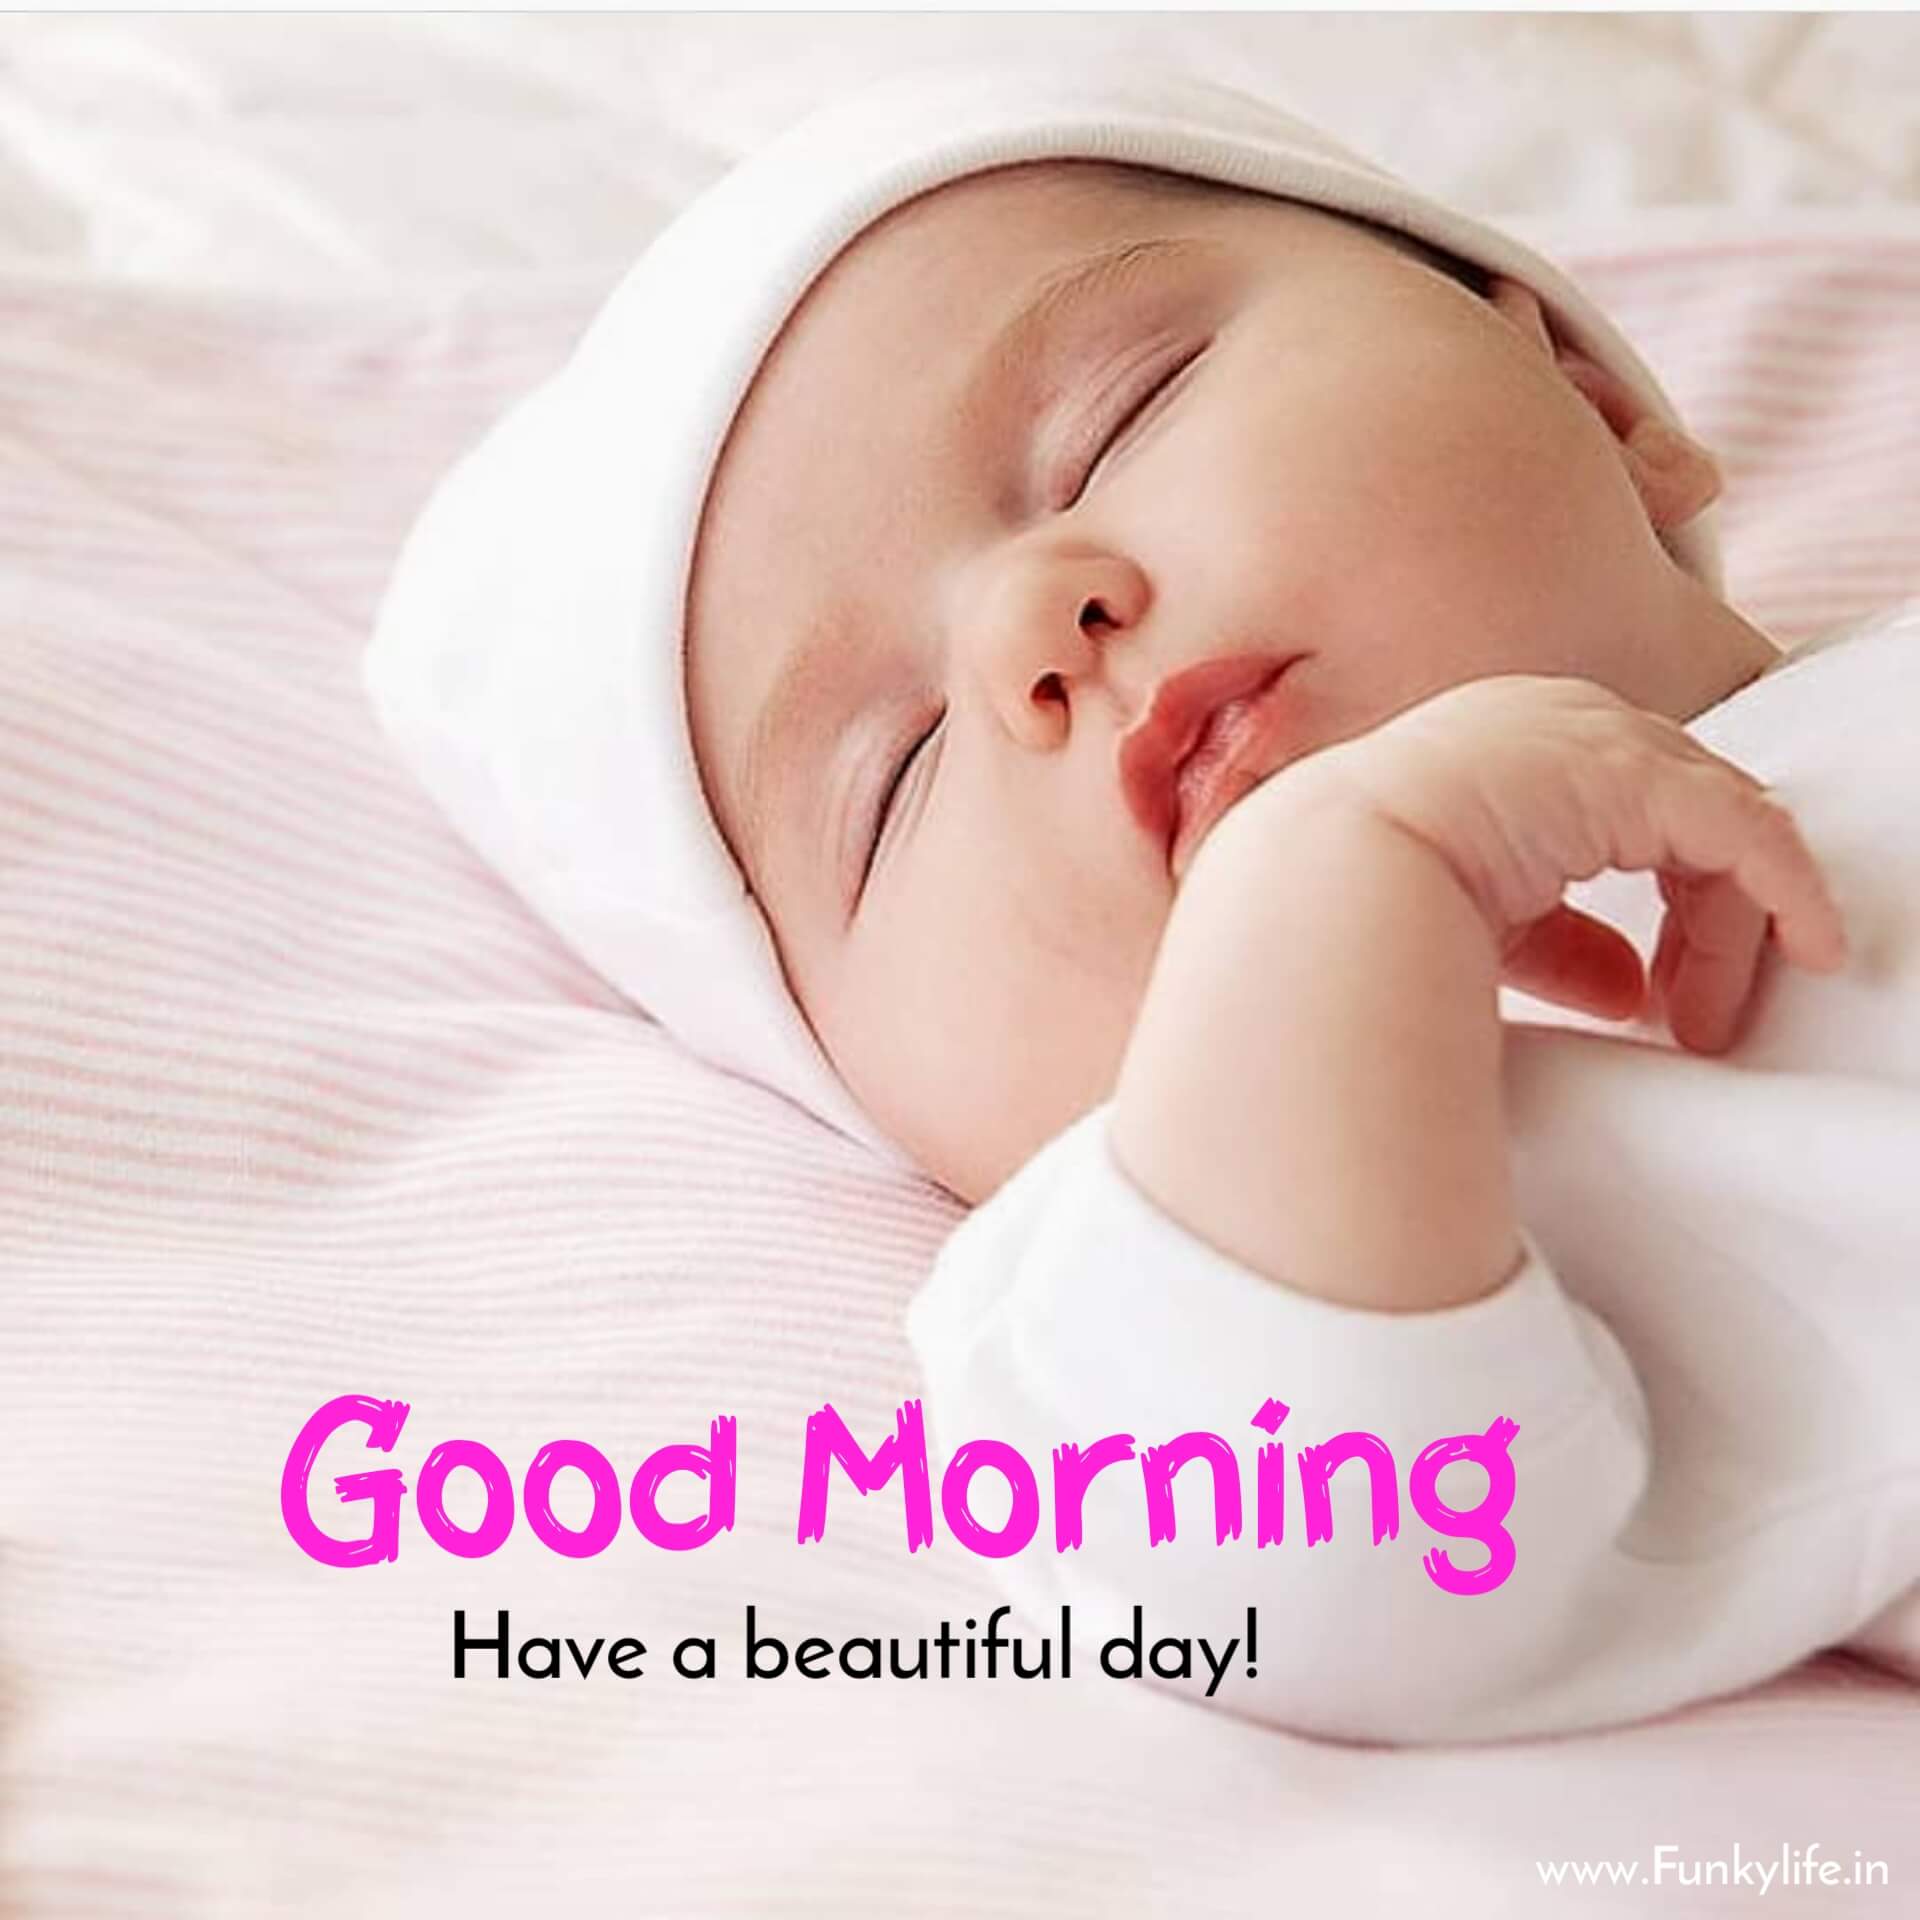 Cute baby good morning pic